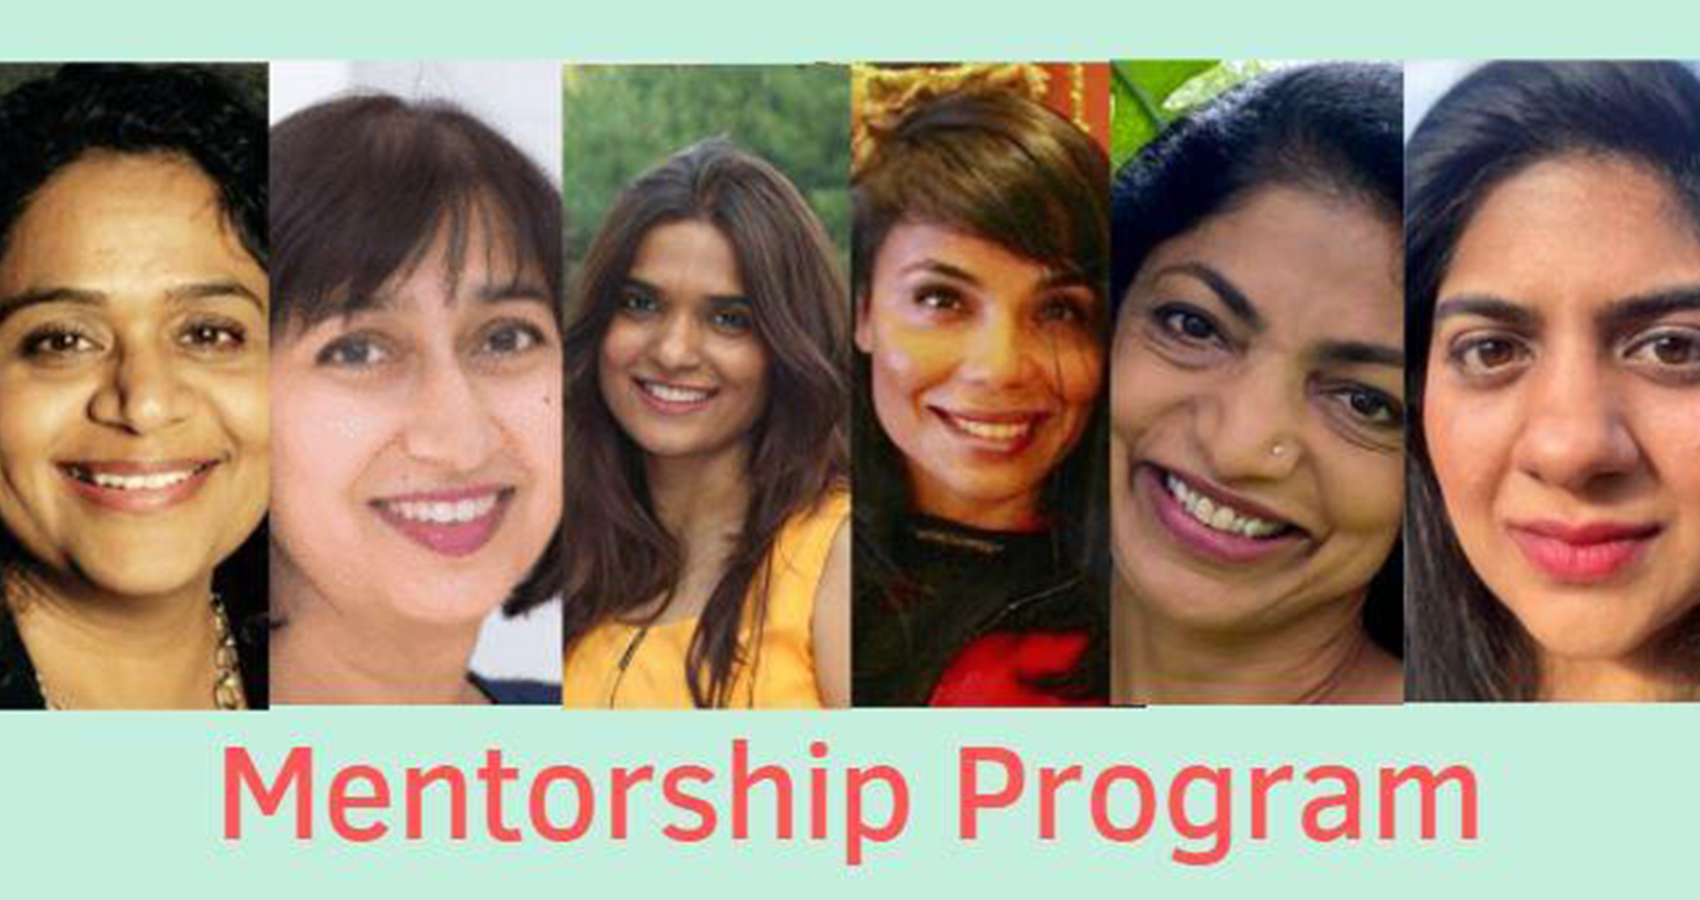 Women Who Win Launches Free Mentorship & Career Guidance Program Across Industries